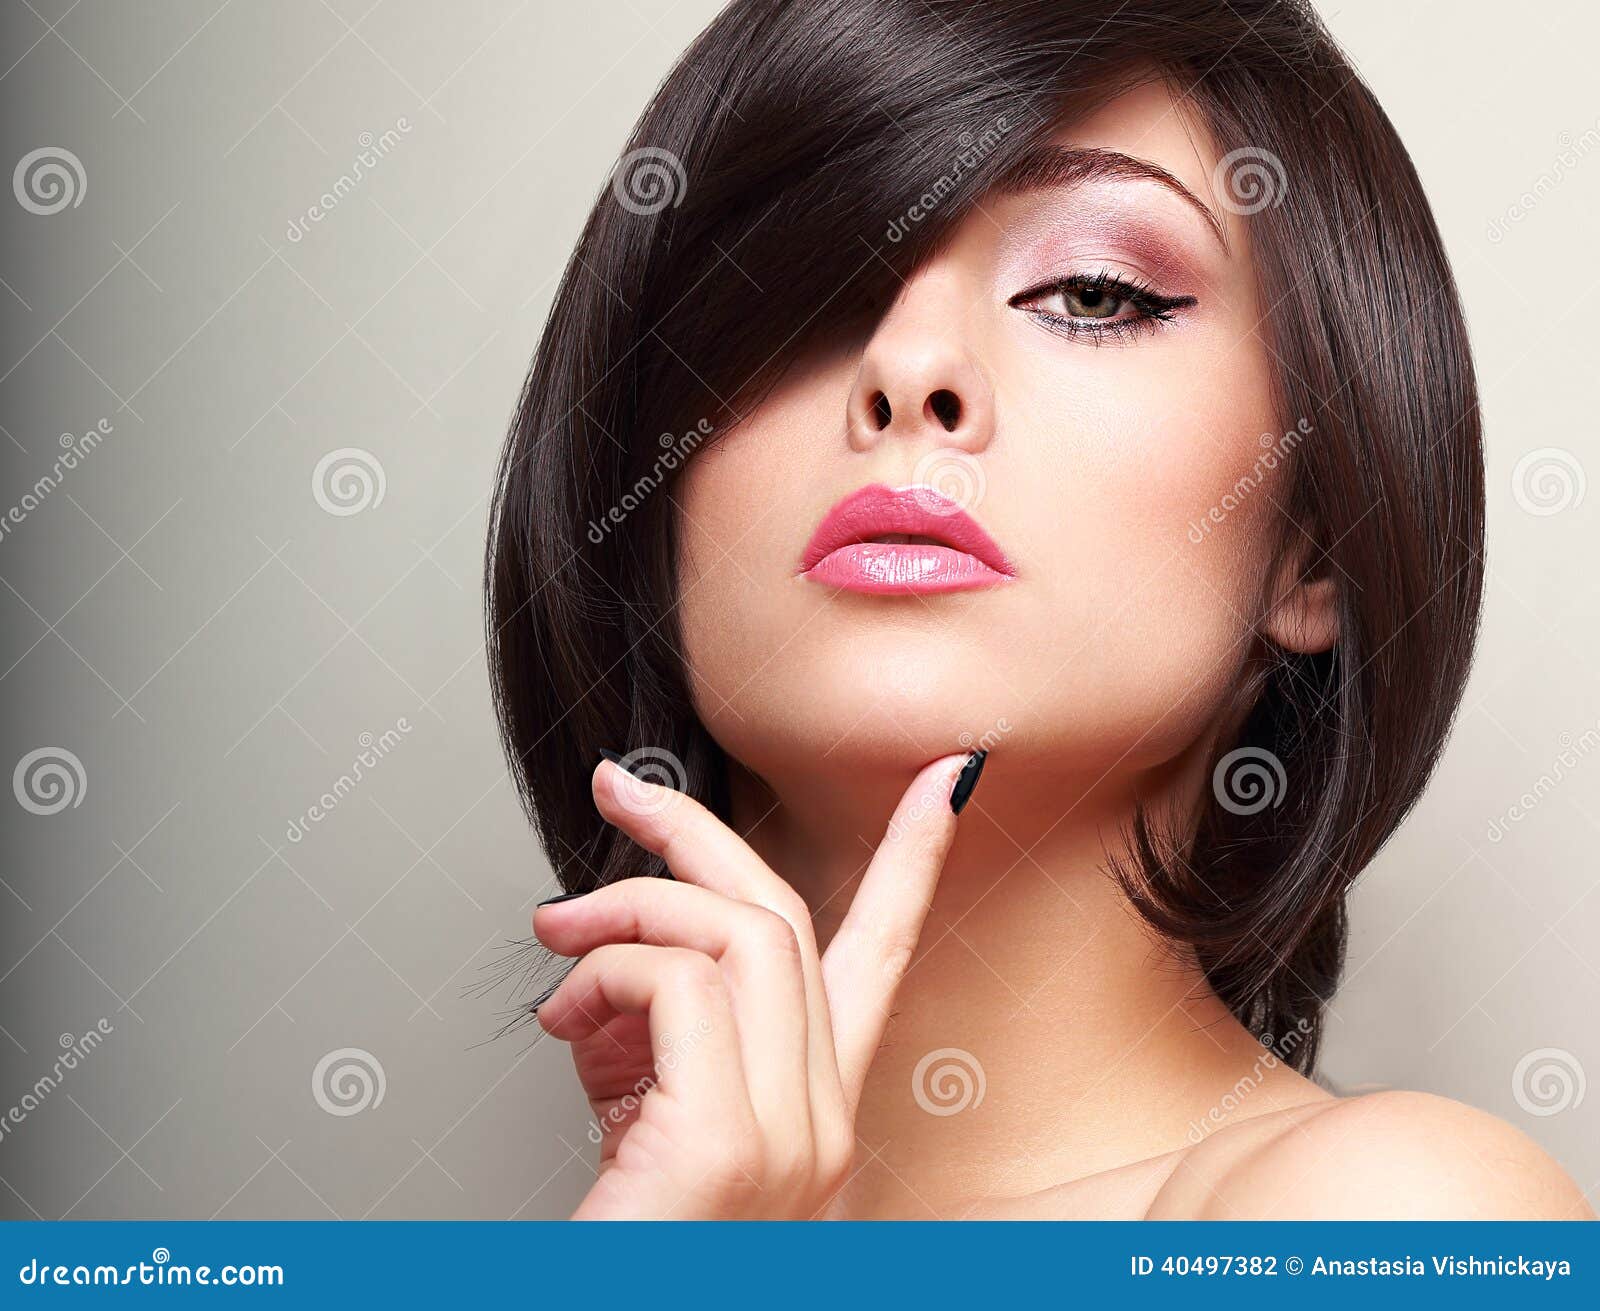 Black Short Hair Style Female Model Looking with Finger Near the Face Stock  Photo - Image of bright, fingers: 40497382